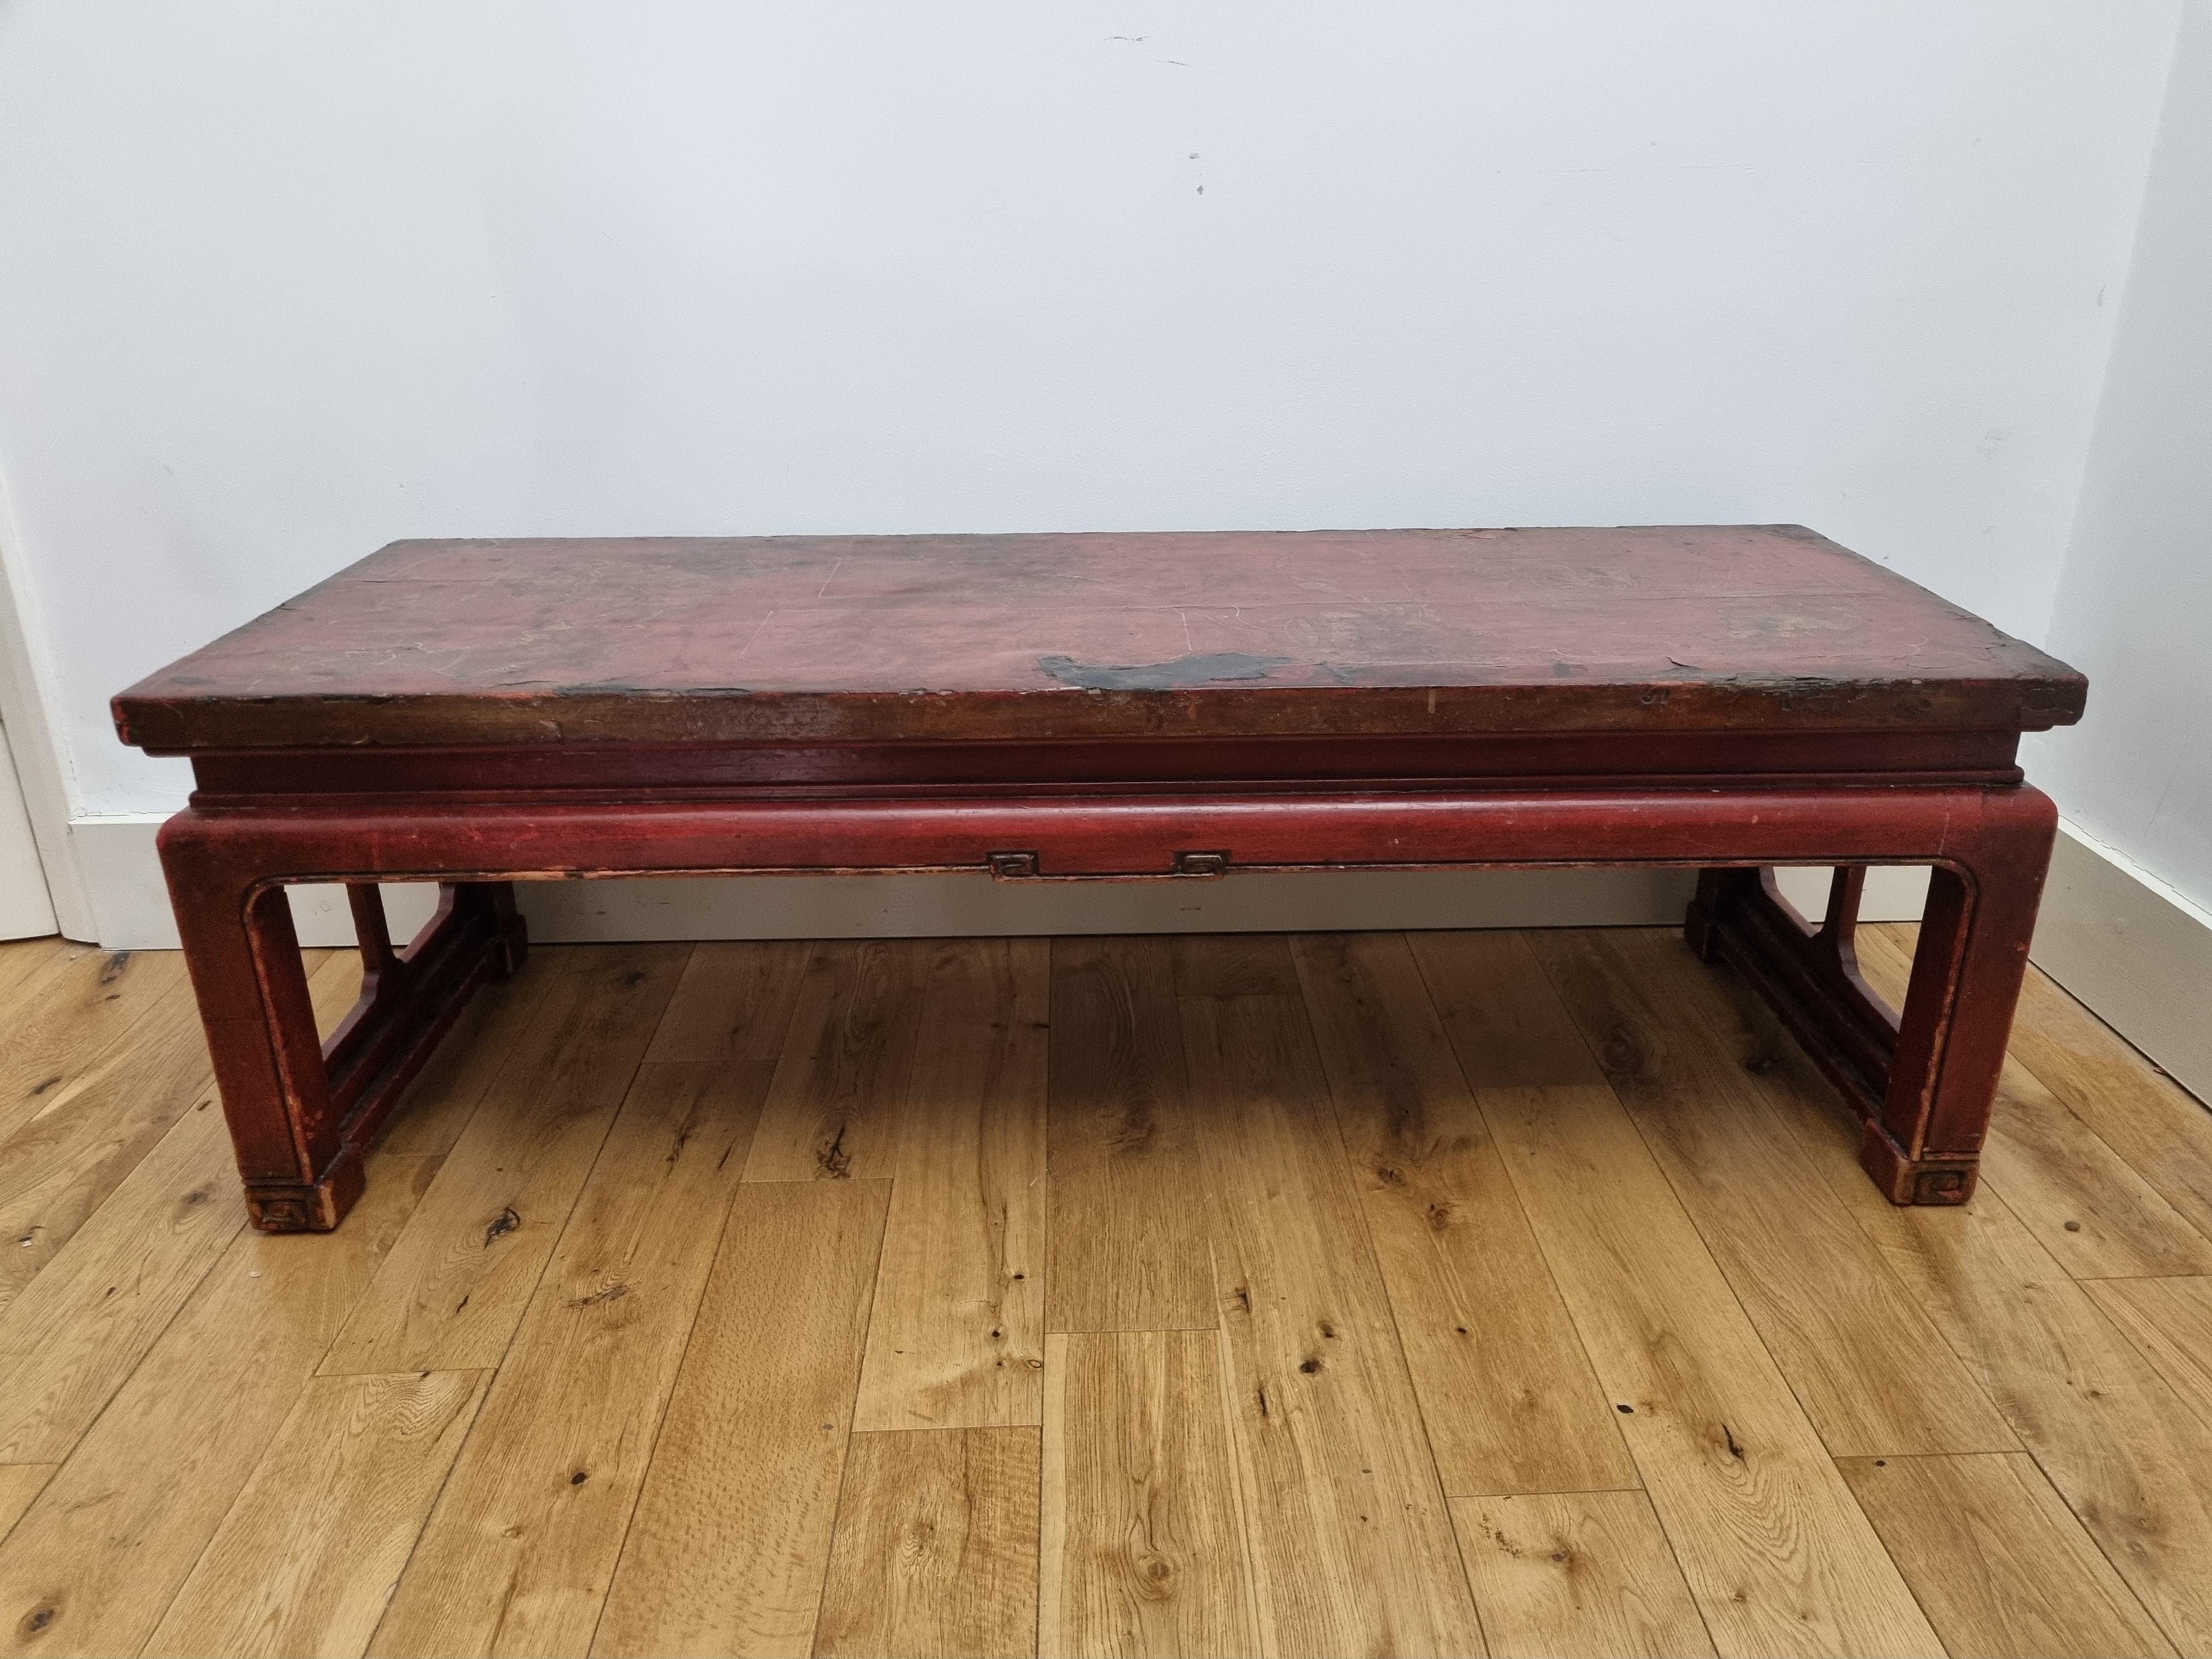 A late 19th-century red lacquered Shanxi Chinese table, beautifully hand-painted with floral designs and Chinese calligraphy.
It has been made with meticulous attention to detail and is structurally sound .
The lacquered finish bears a wonderful,